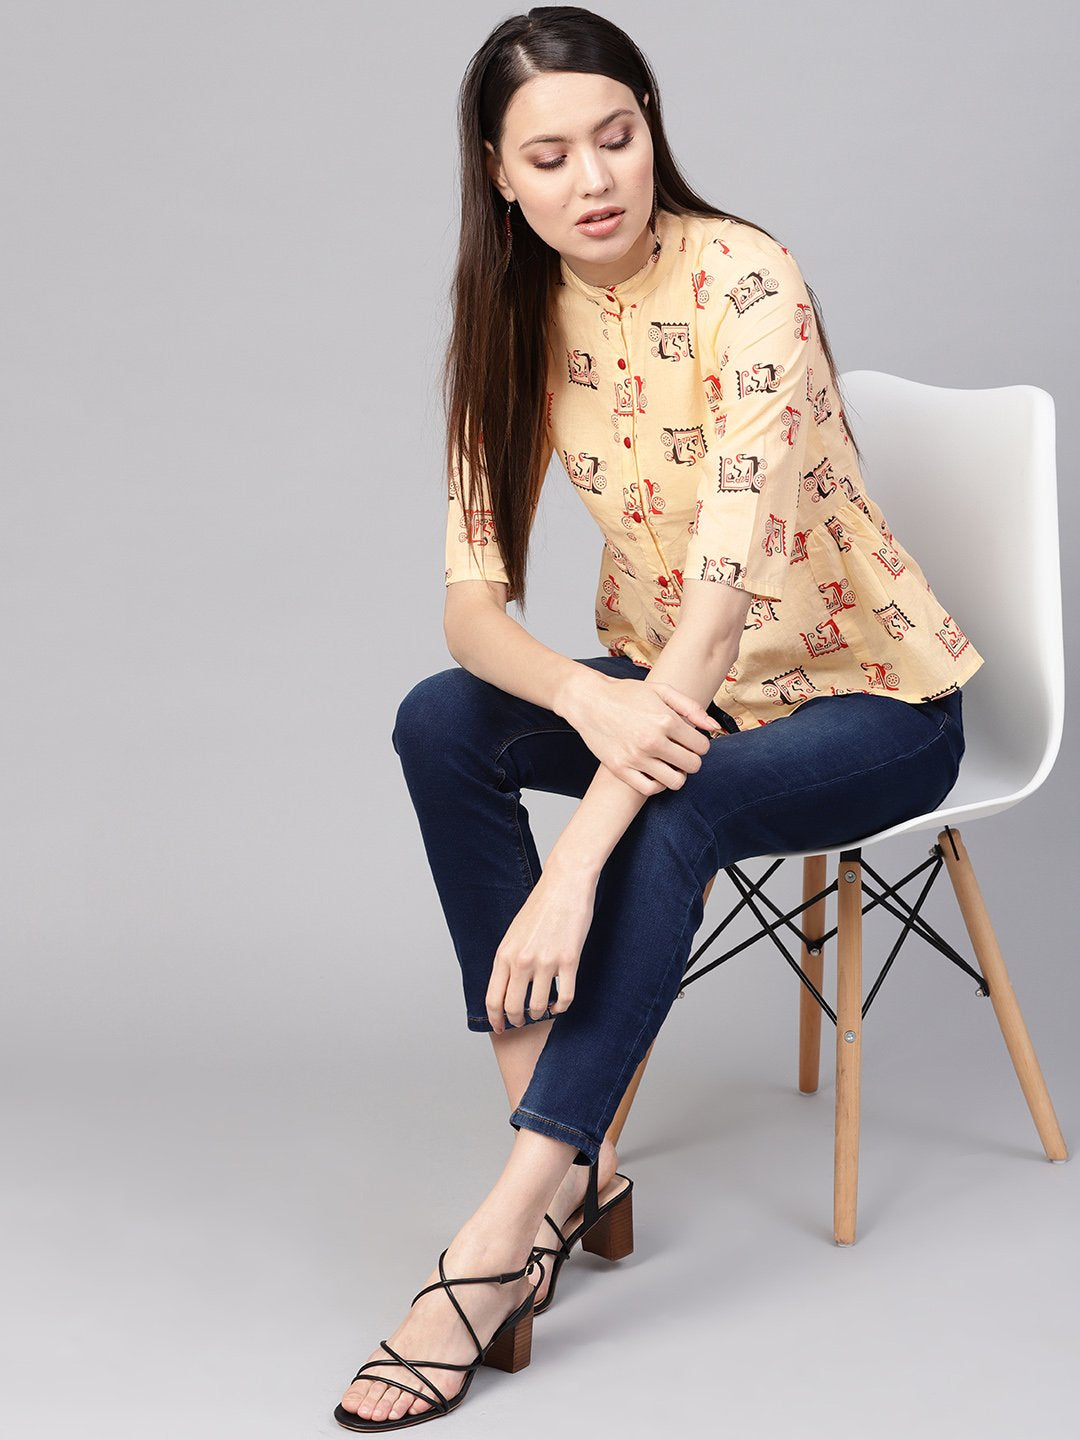 Women's Cream-Coloured & Red Printed Shirt Style Top - Nayo Clothing